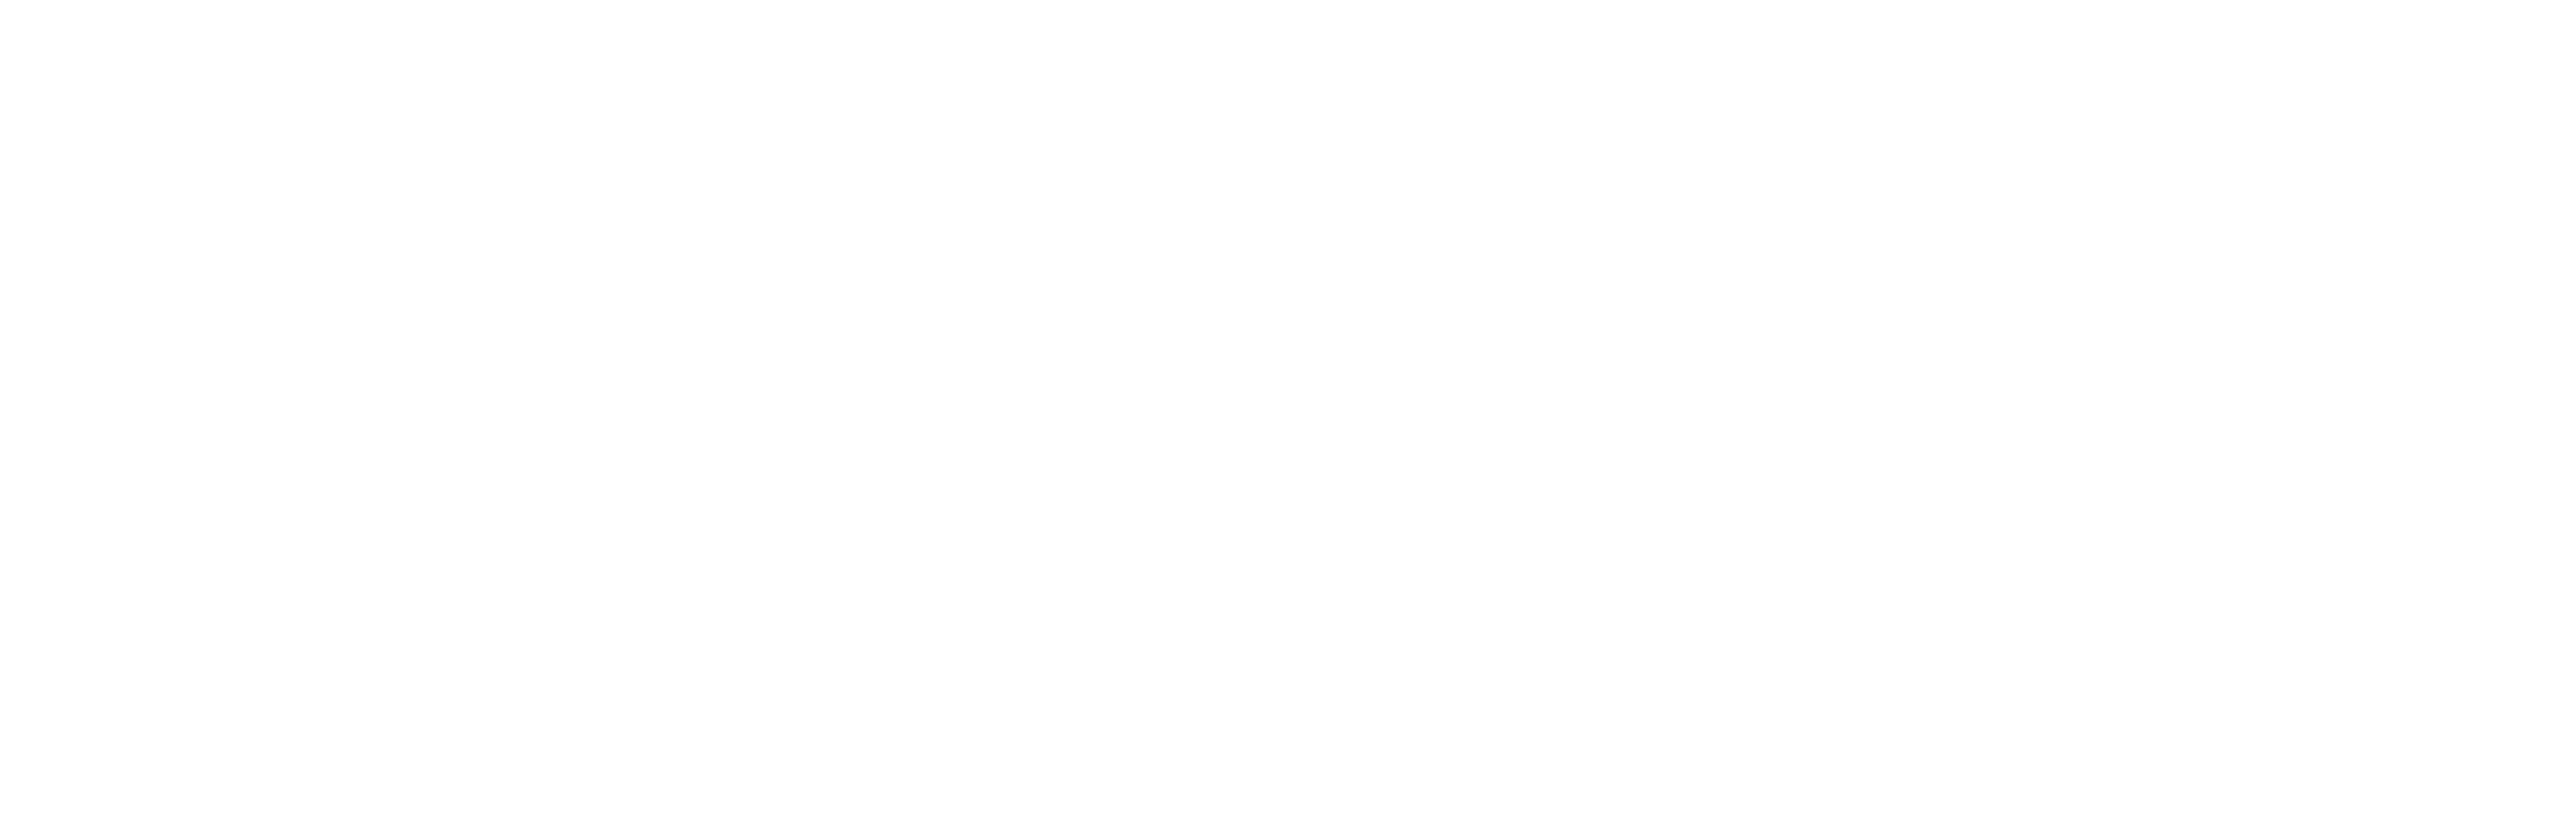 Interviews and demos from the AI for Good community